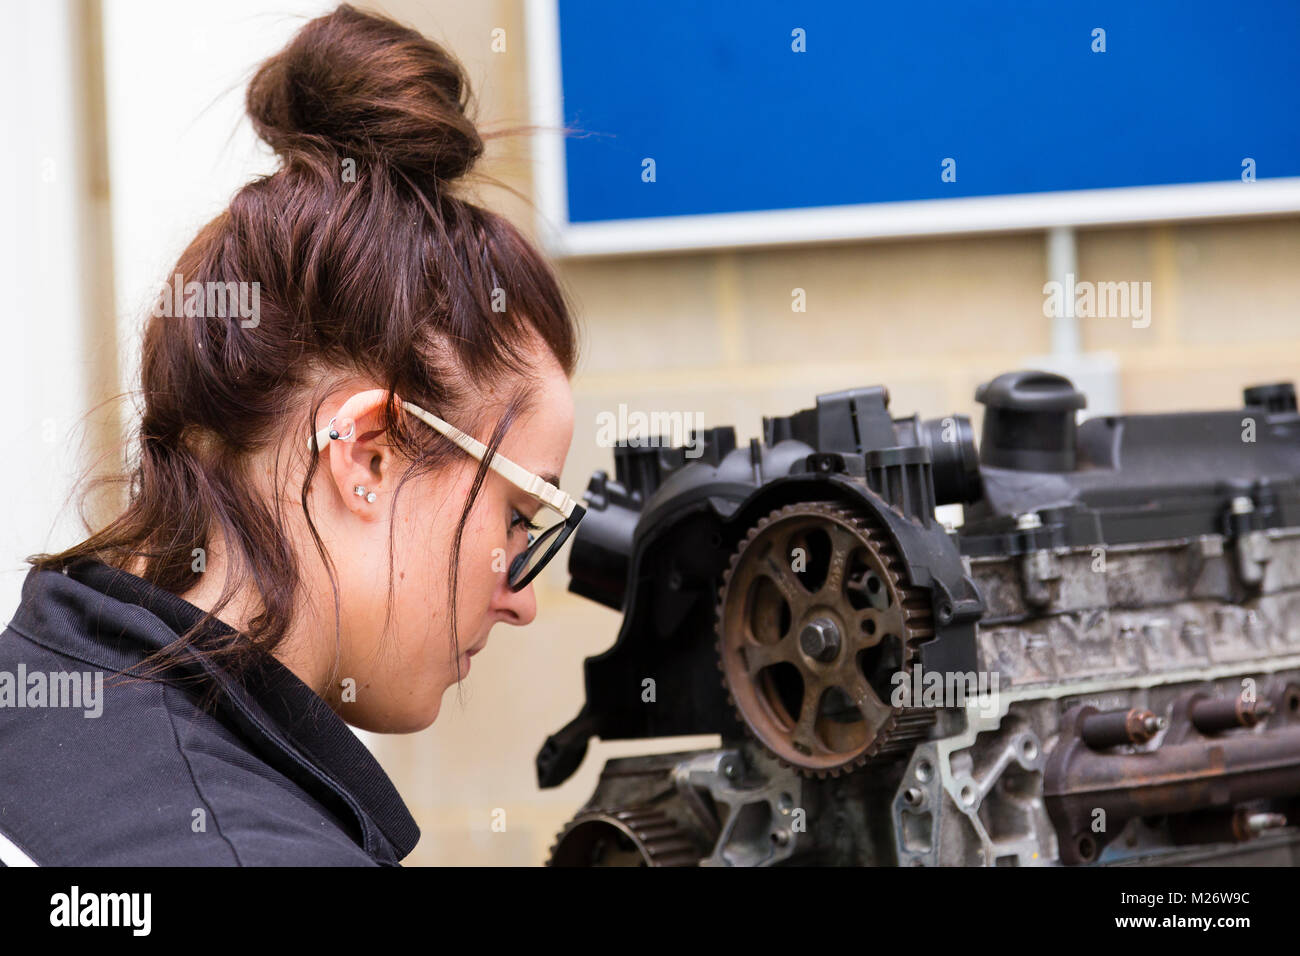 A young woman wearing white gloves replaces the timing belt on a car engine. Stock Photo